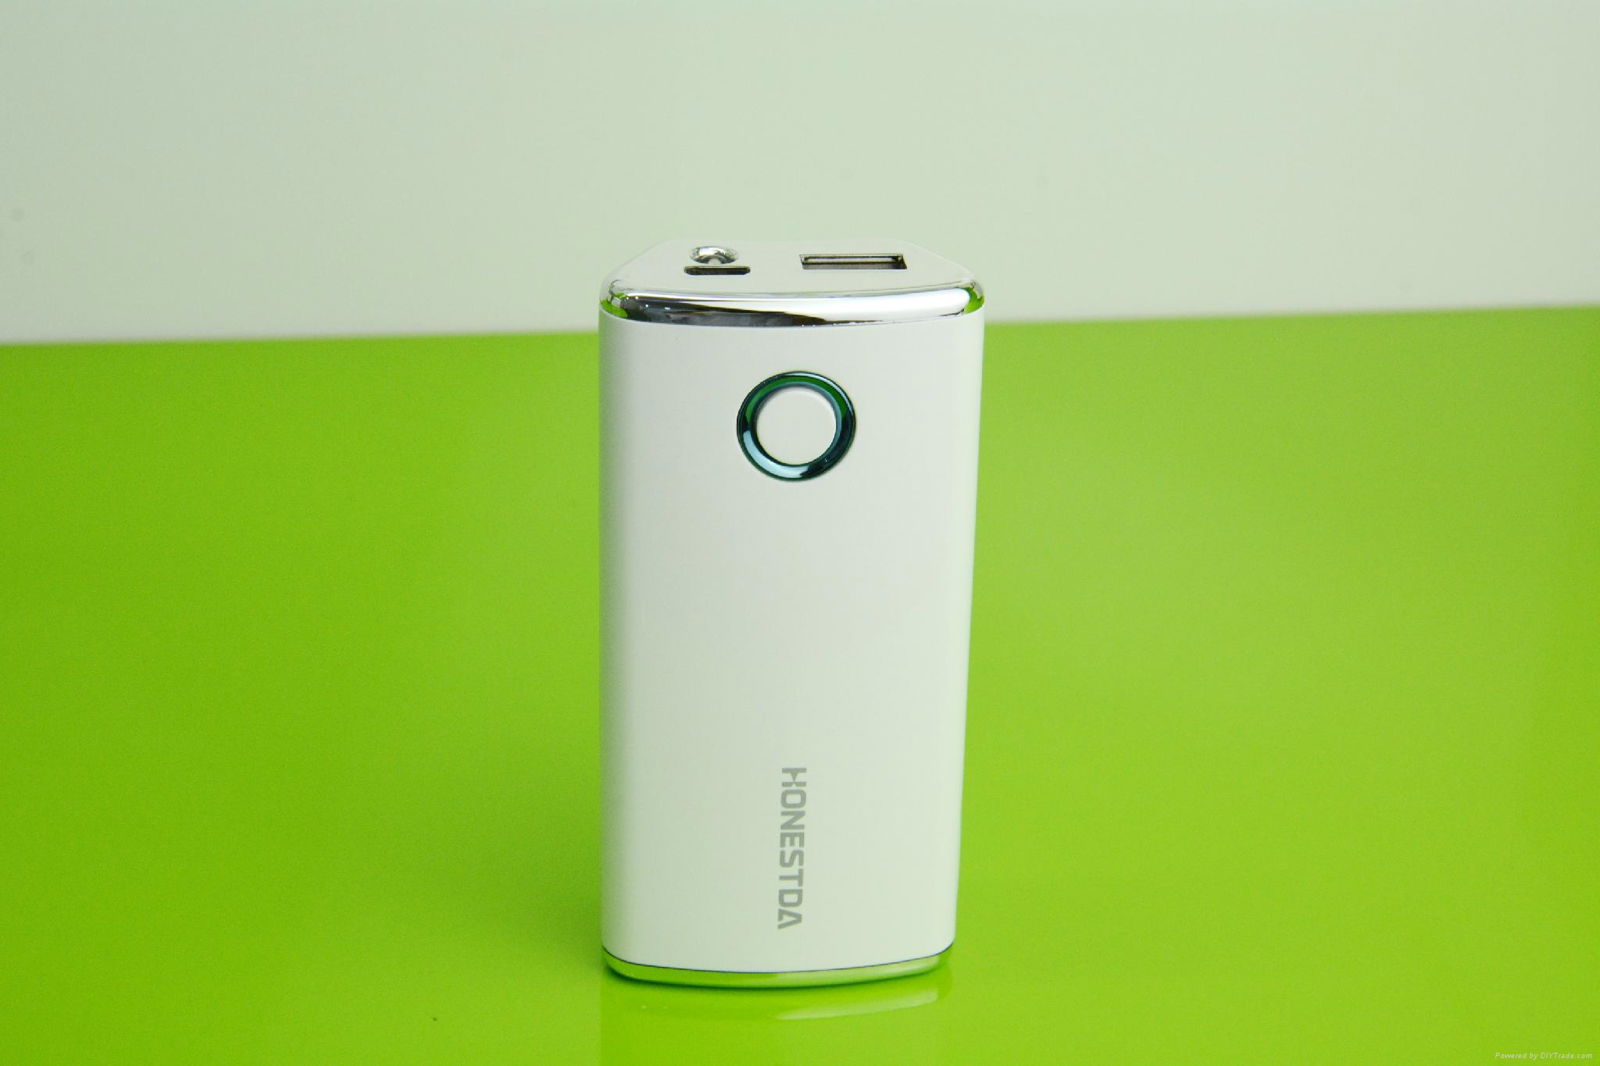 Power Bank 10400mAh, Portable Mobile Power Bank with 1 Year Warranty 2